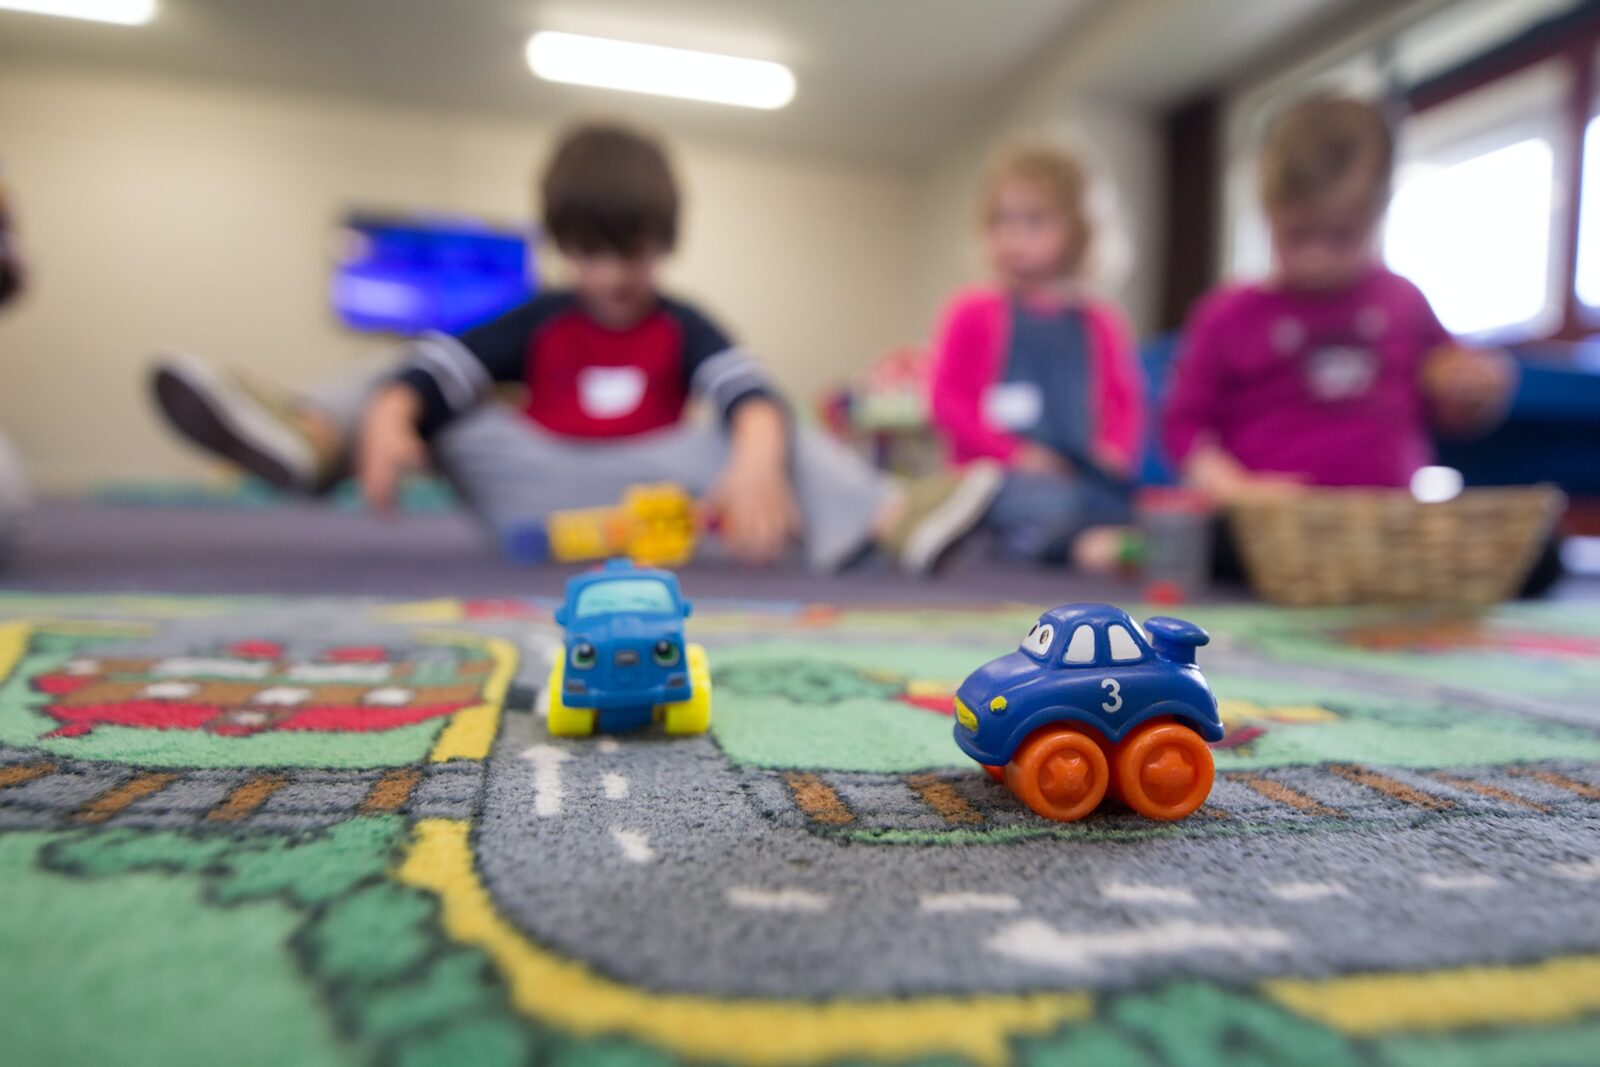 Children Playing with Toy Cars on Mat